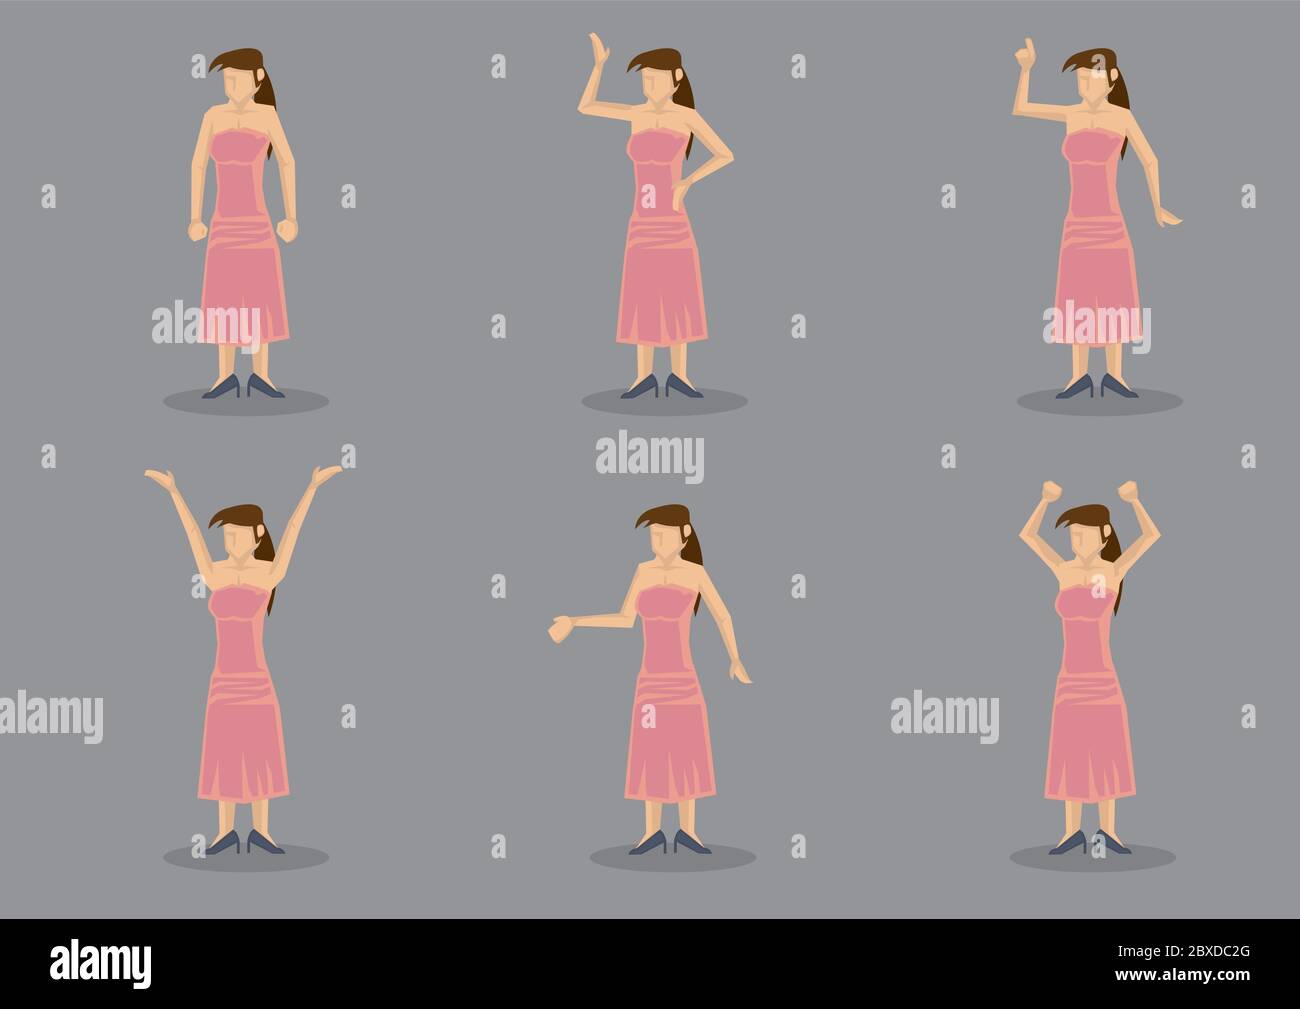 Set of six vector illustration of a young lady wearing long pink strapless dress and black heels posing in different gestures isolated on grey backgro Stock Vector